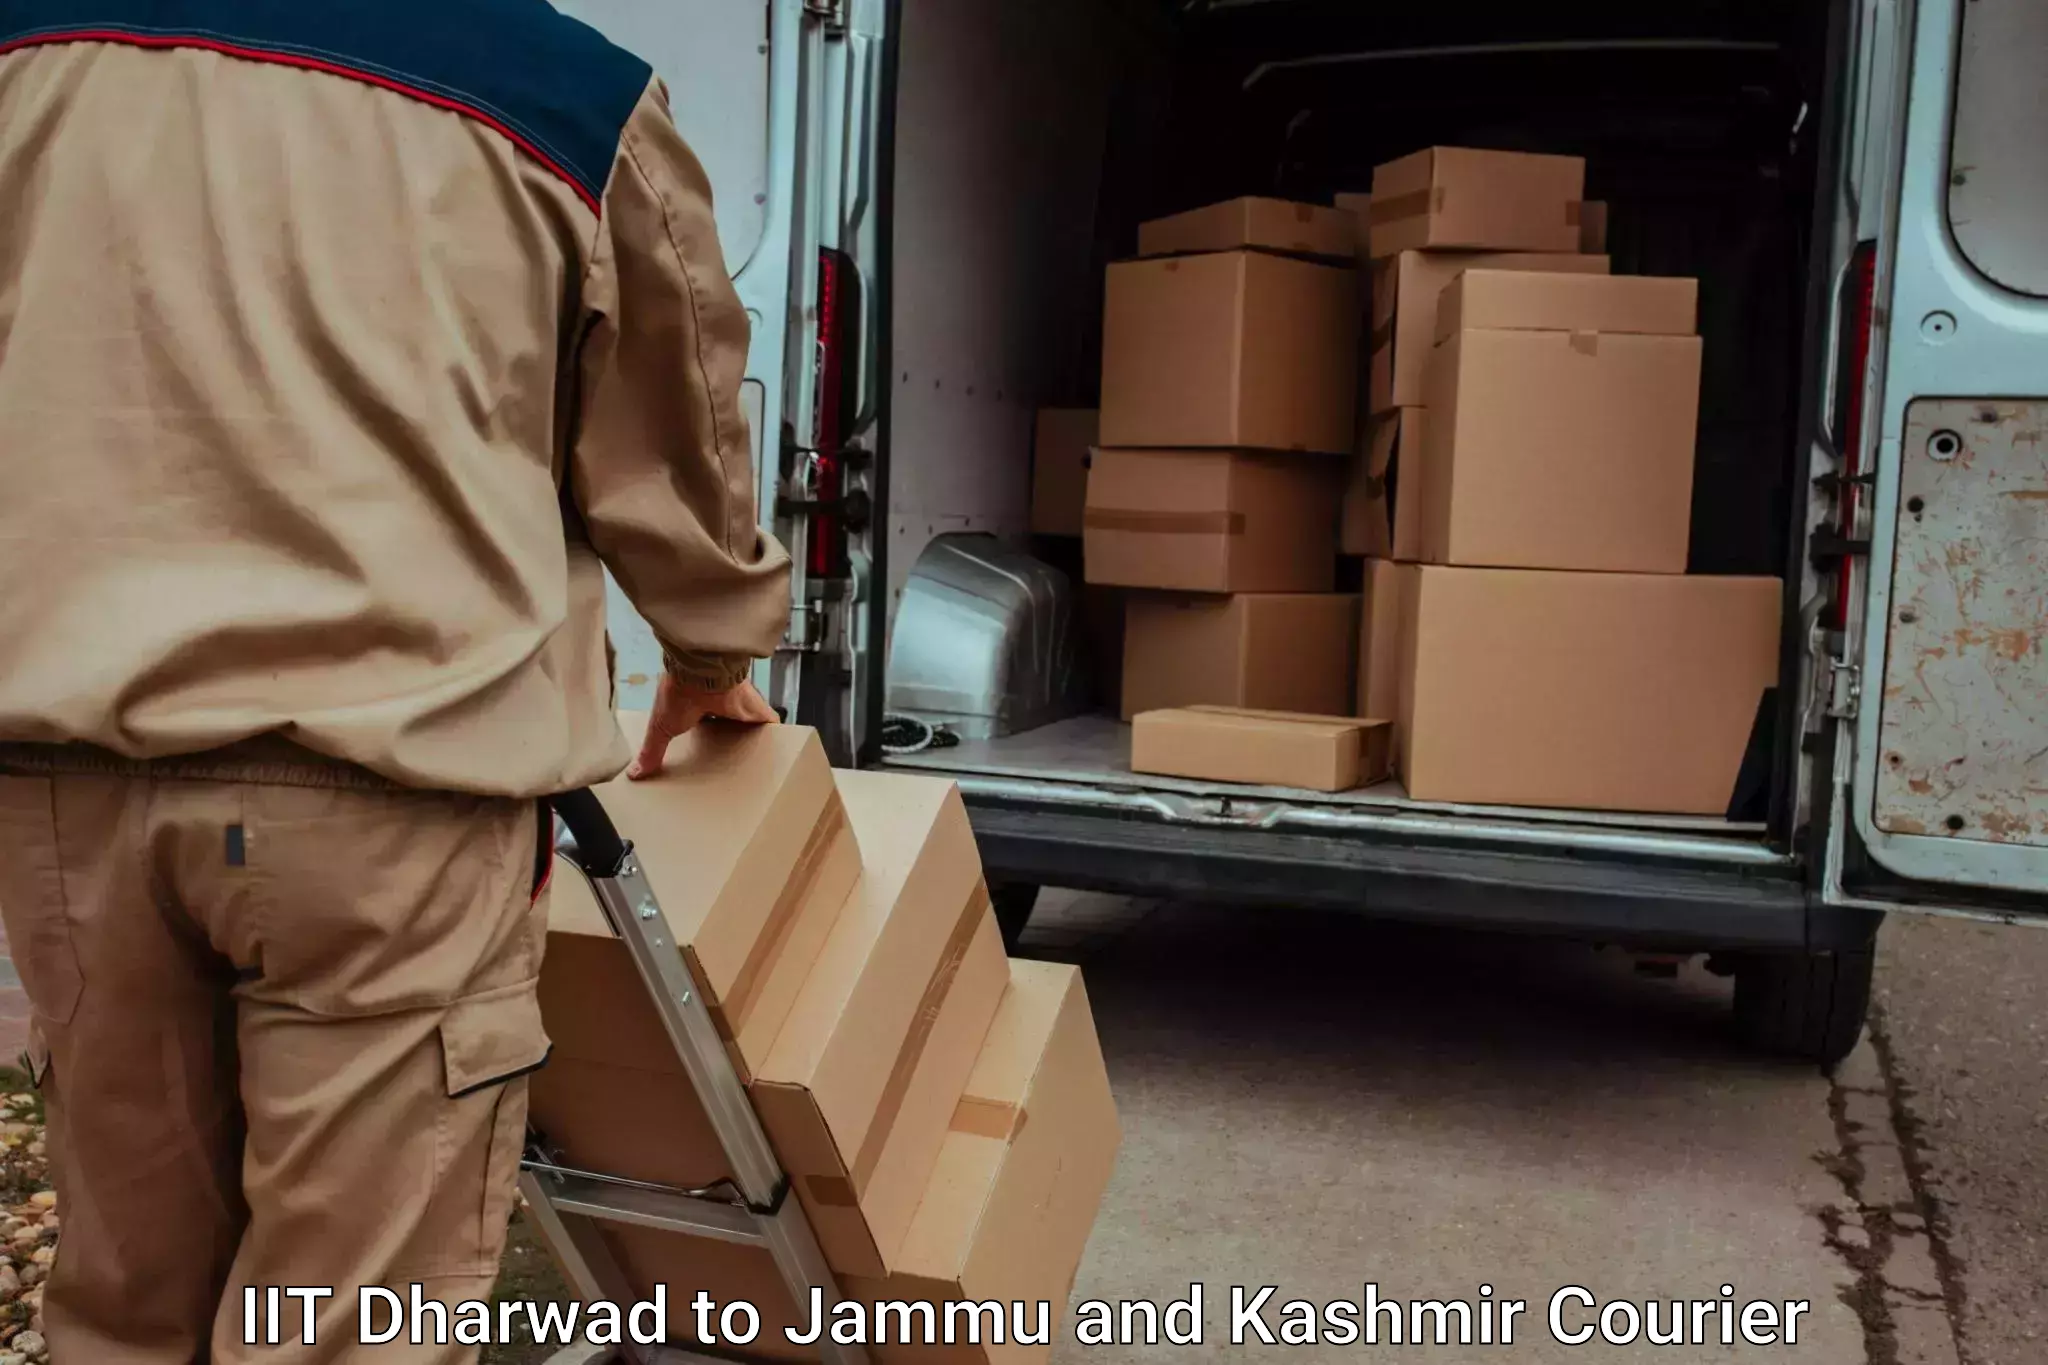 Hassle-free luggage shipping IIT Dharwad to Udhampur